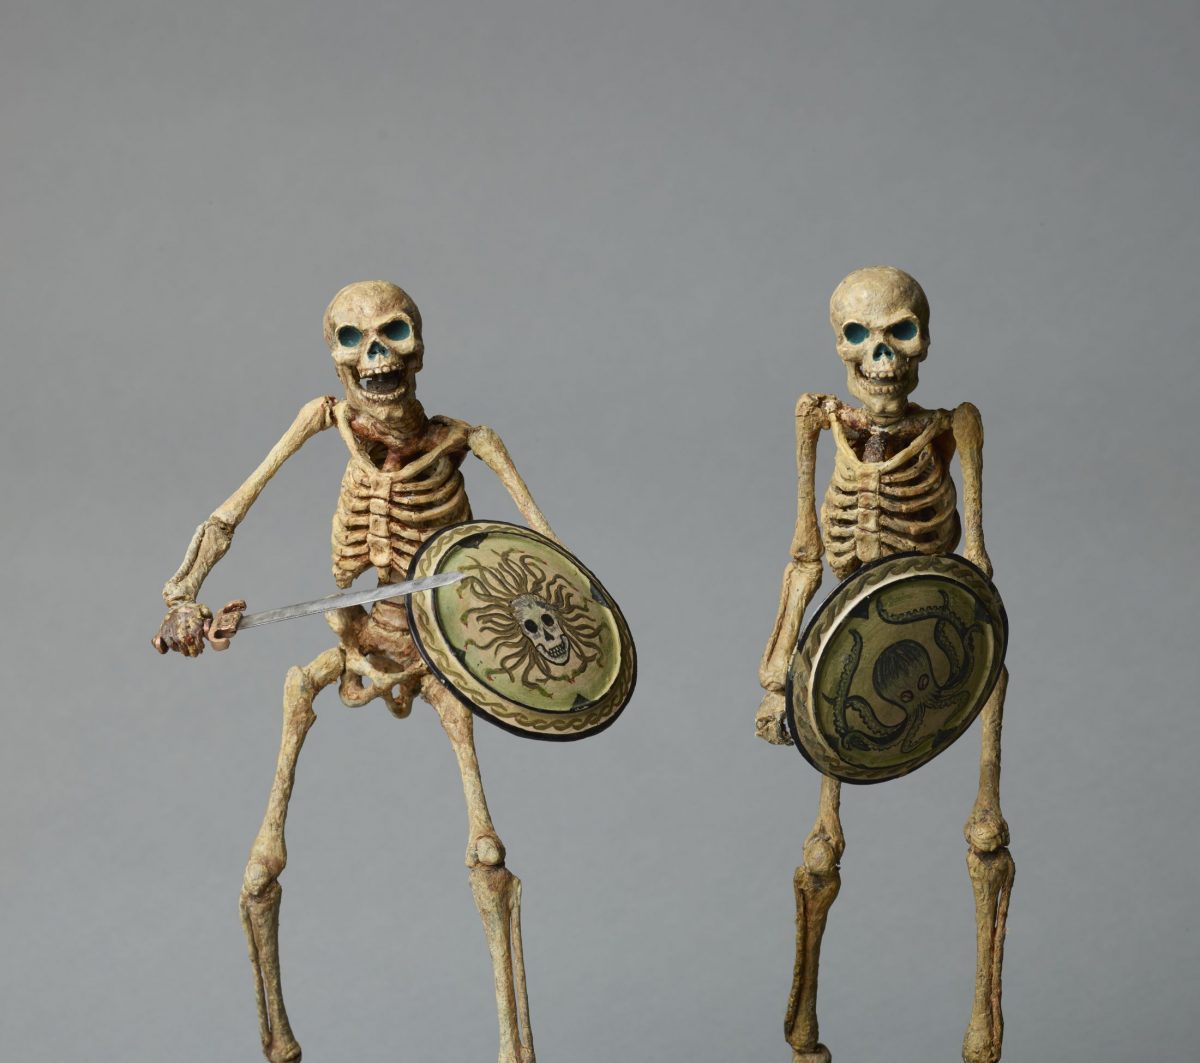 Original Skeleton model. armatured skeleton, with Medusa shield, from Jason and the Argonauts, c.1962 and Original Skeleton model; octopus shield by Ray Harryhausen (1920-2013), armature by Fred Harryhausen, c.1962 Collection: The Ray and Diana Harryhausen Foundation (Charity No. SC001419) © The Ray and Diana Harryhausen Foundation Photography: Sam Drake (National Galleries of Scotland)